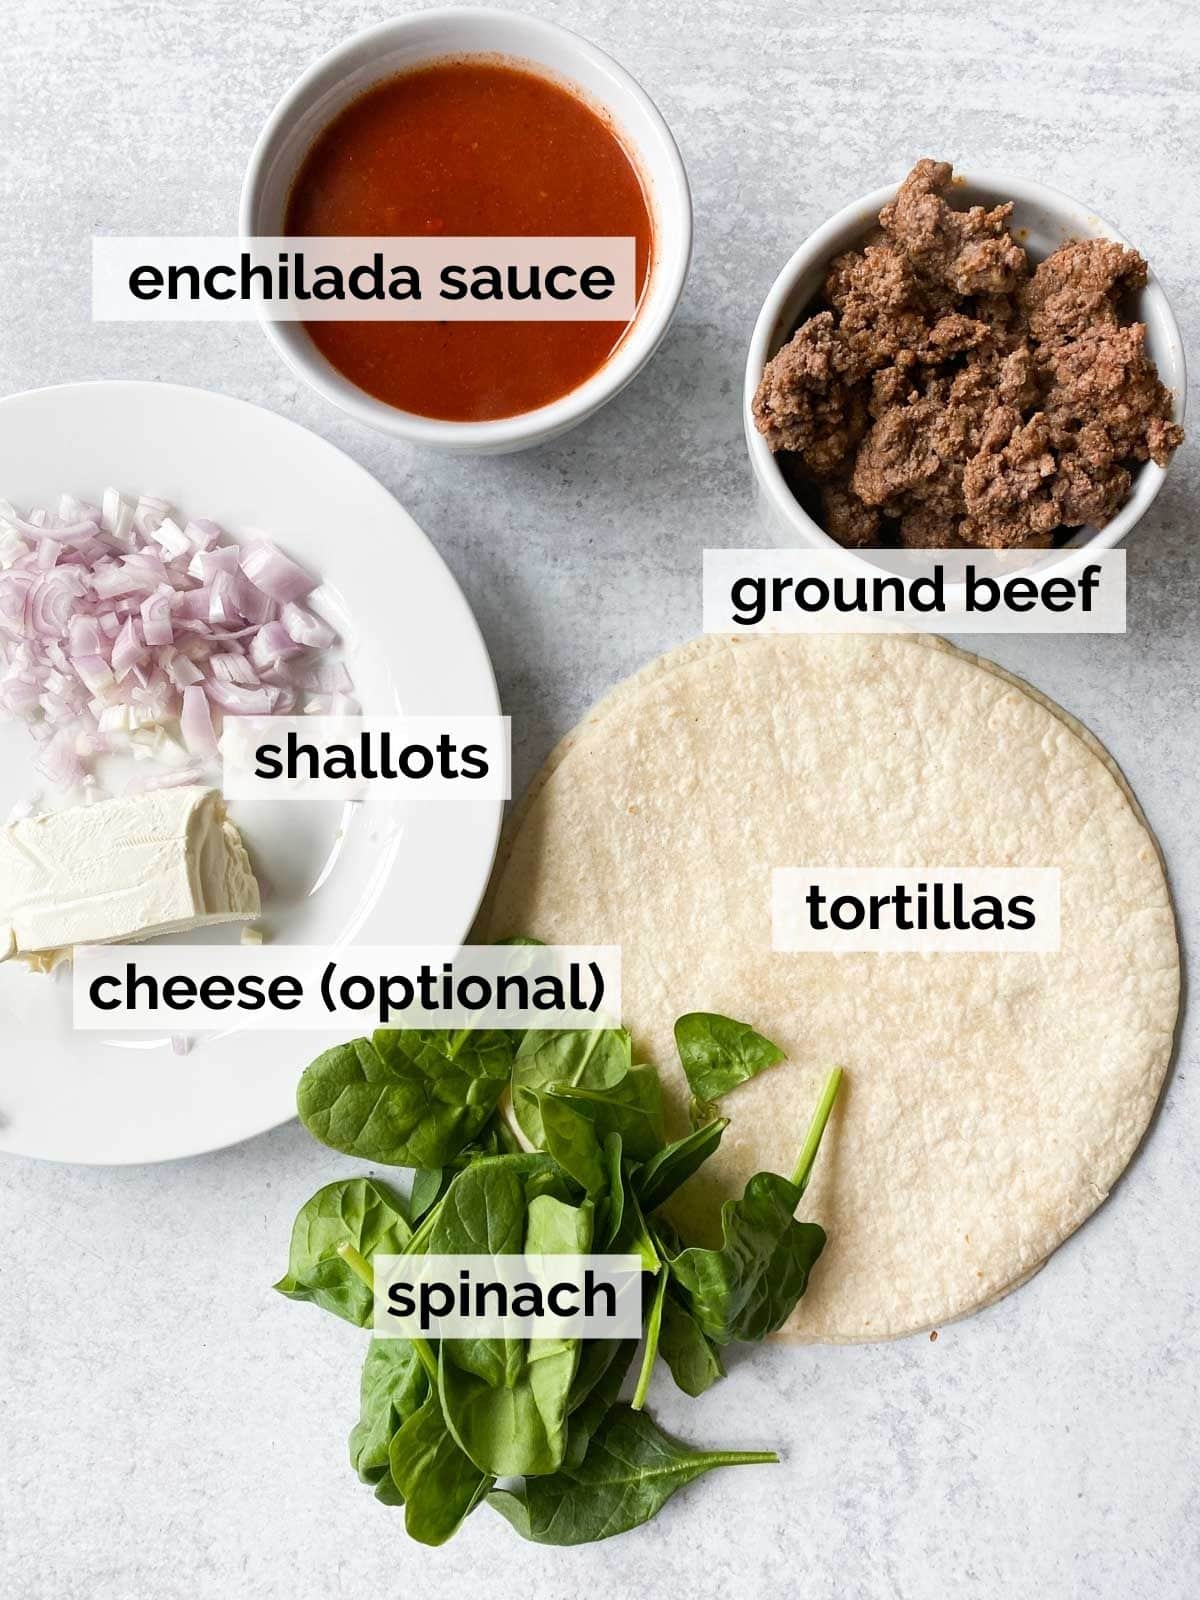 Ingredients for healthy enchiladas on a table - beef, tortillas, shallots, and sauce.